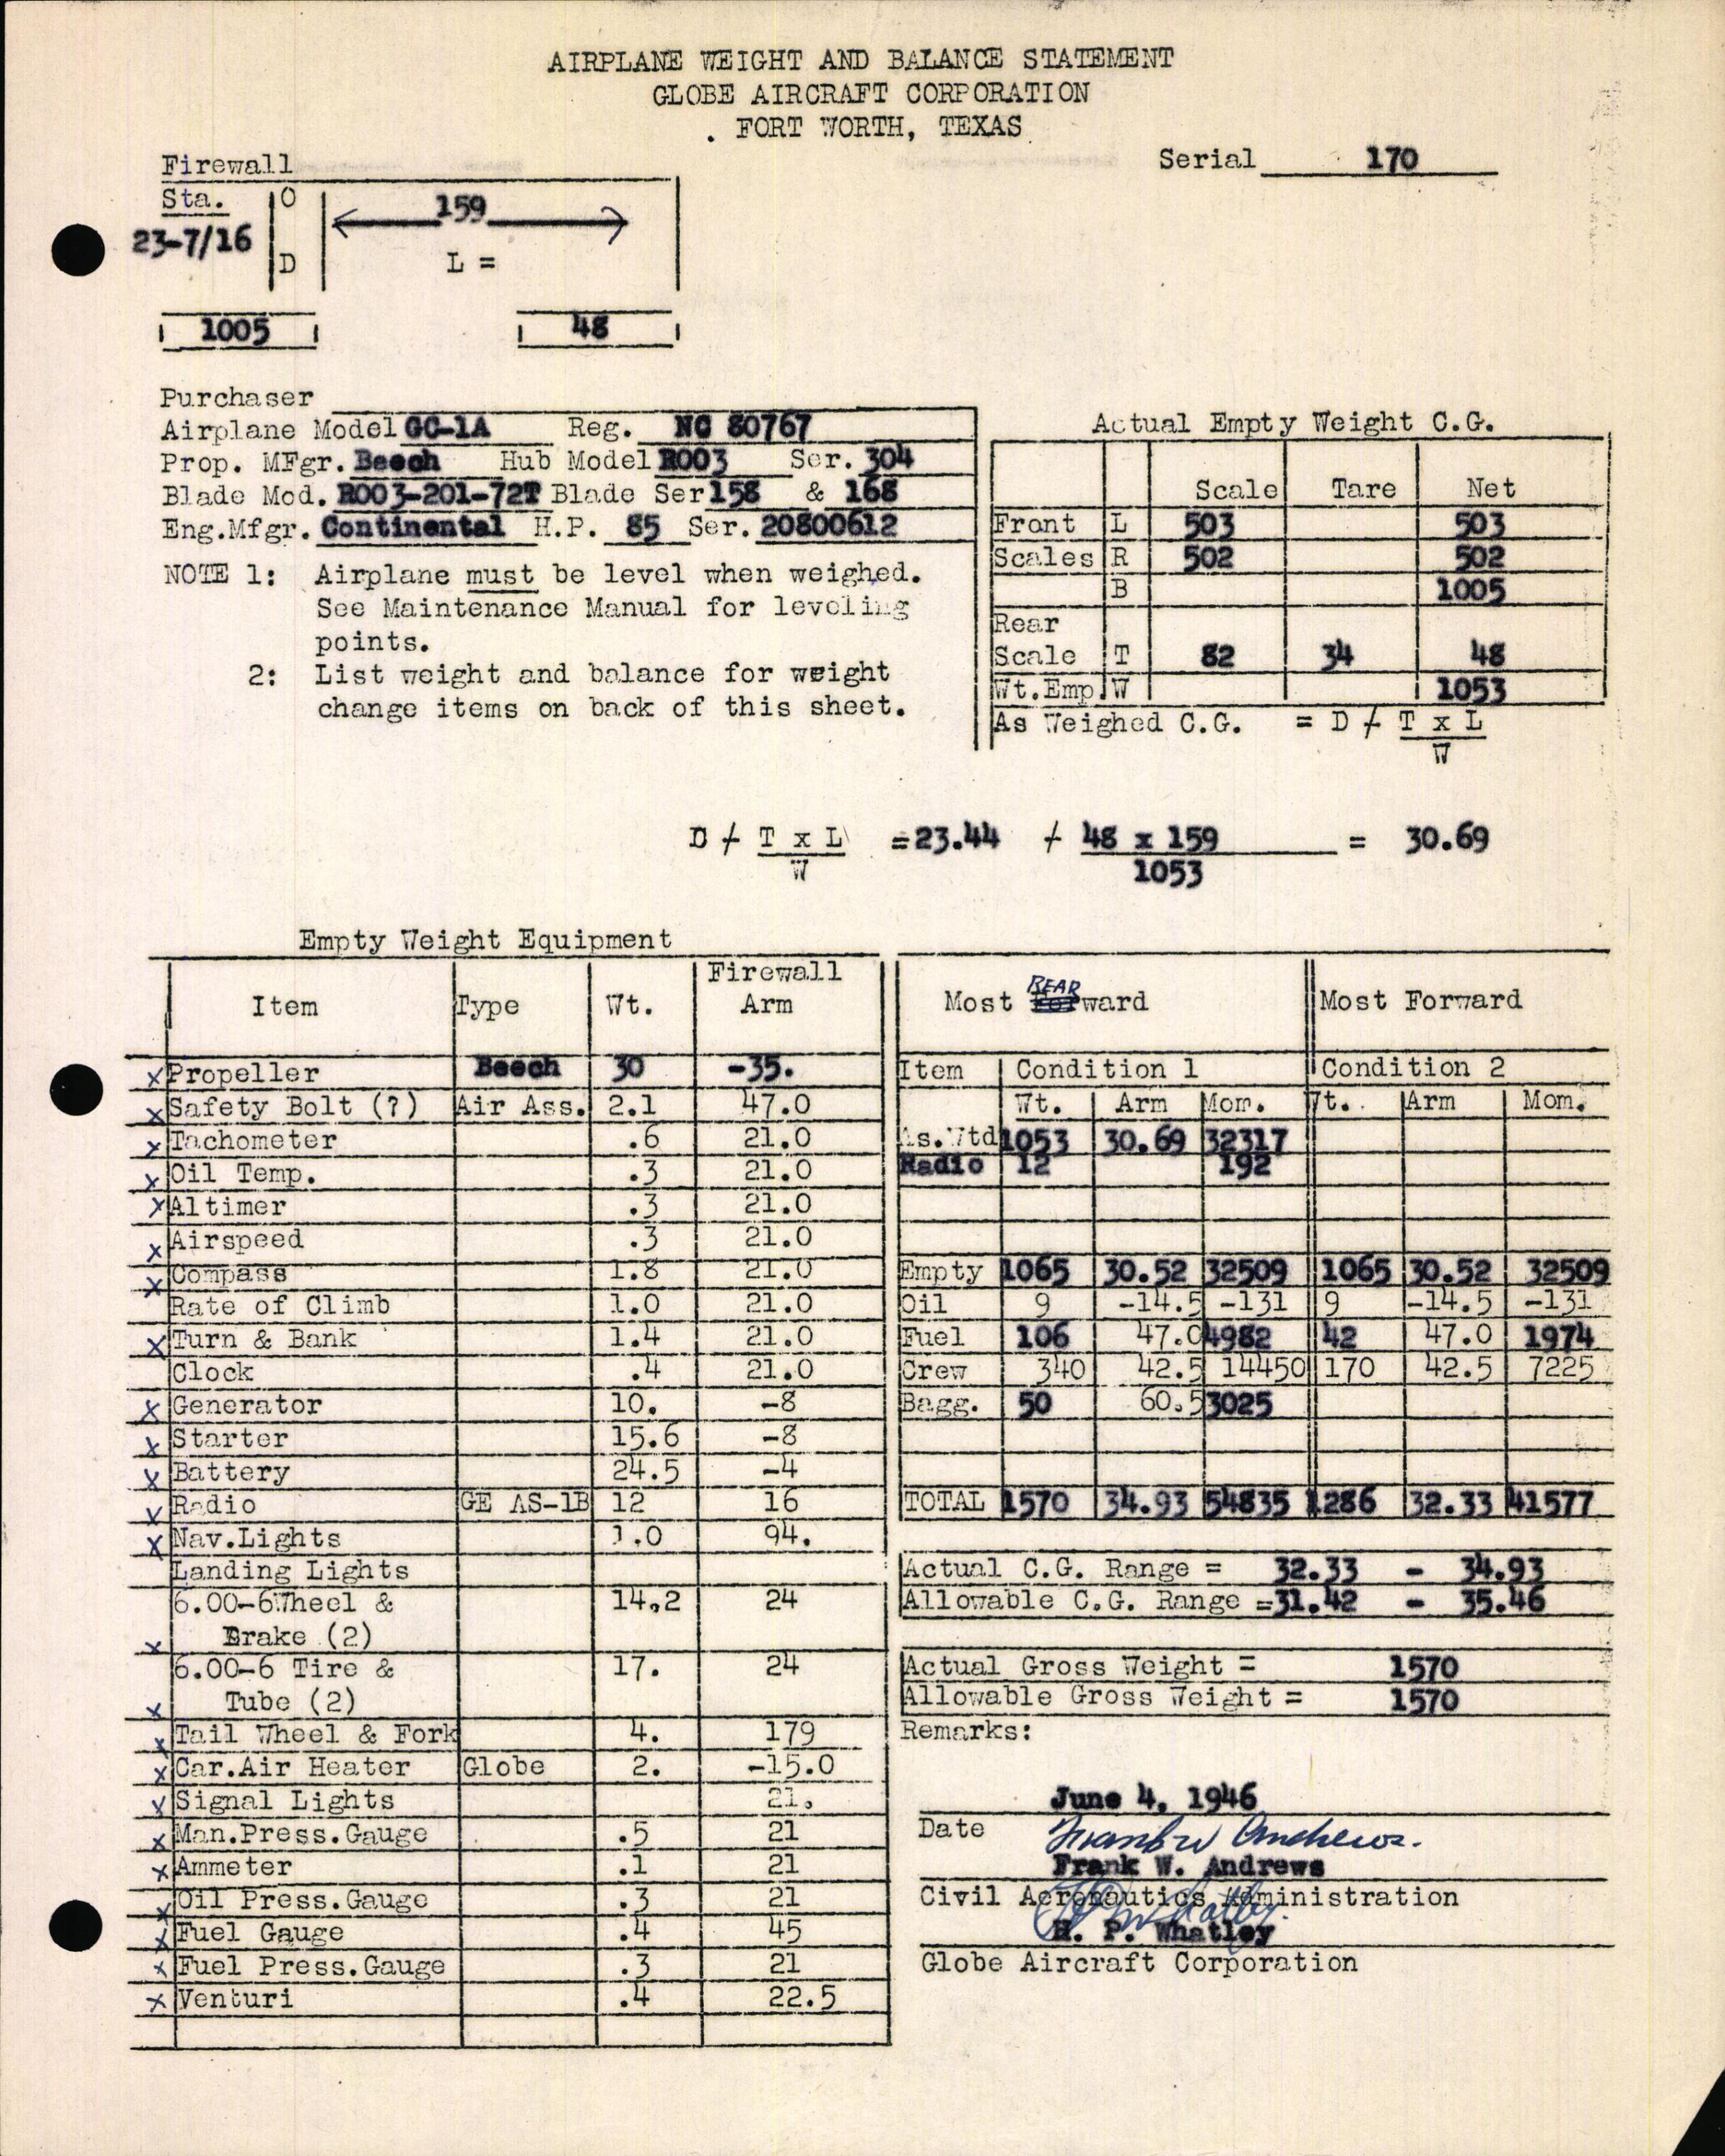 Sample page 5 from AirCorps Library document: Technical Information for Serial Number 170